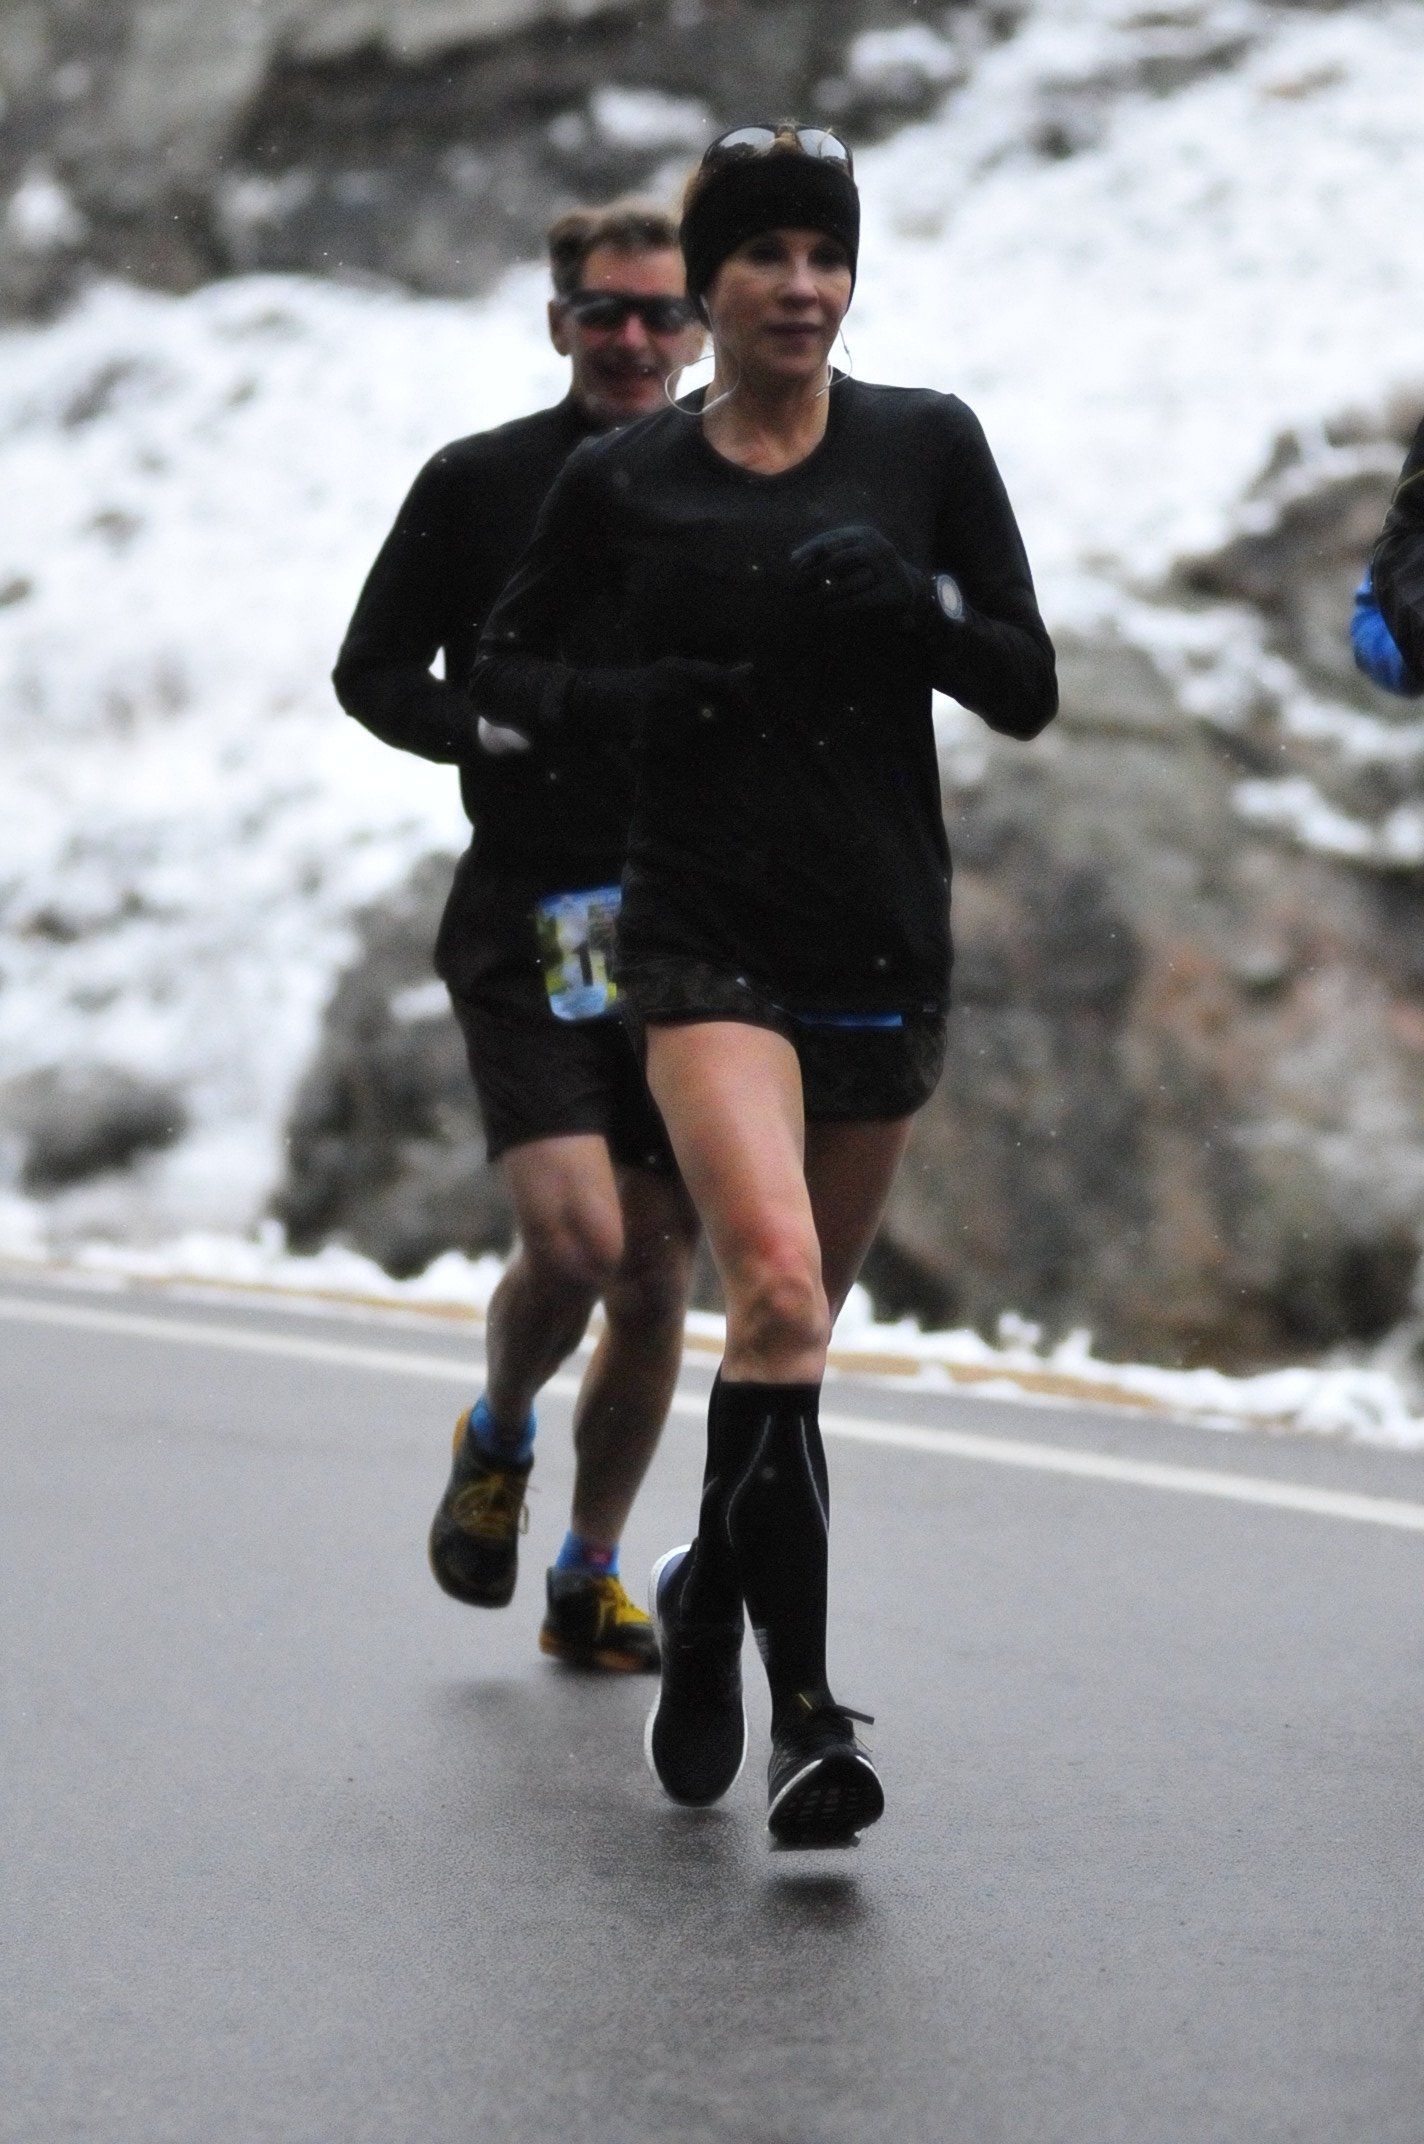  Suzy Seely, 59, has logged more than 6500 race miles and has currently completed 248 marathons and ultras, including a marathon on each continent, thus setting the new world record for the Most Marathons Run Under Four Hours by a Female (Worldwide), according to the Academy of World Records.Photo: Supplied